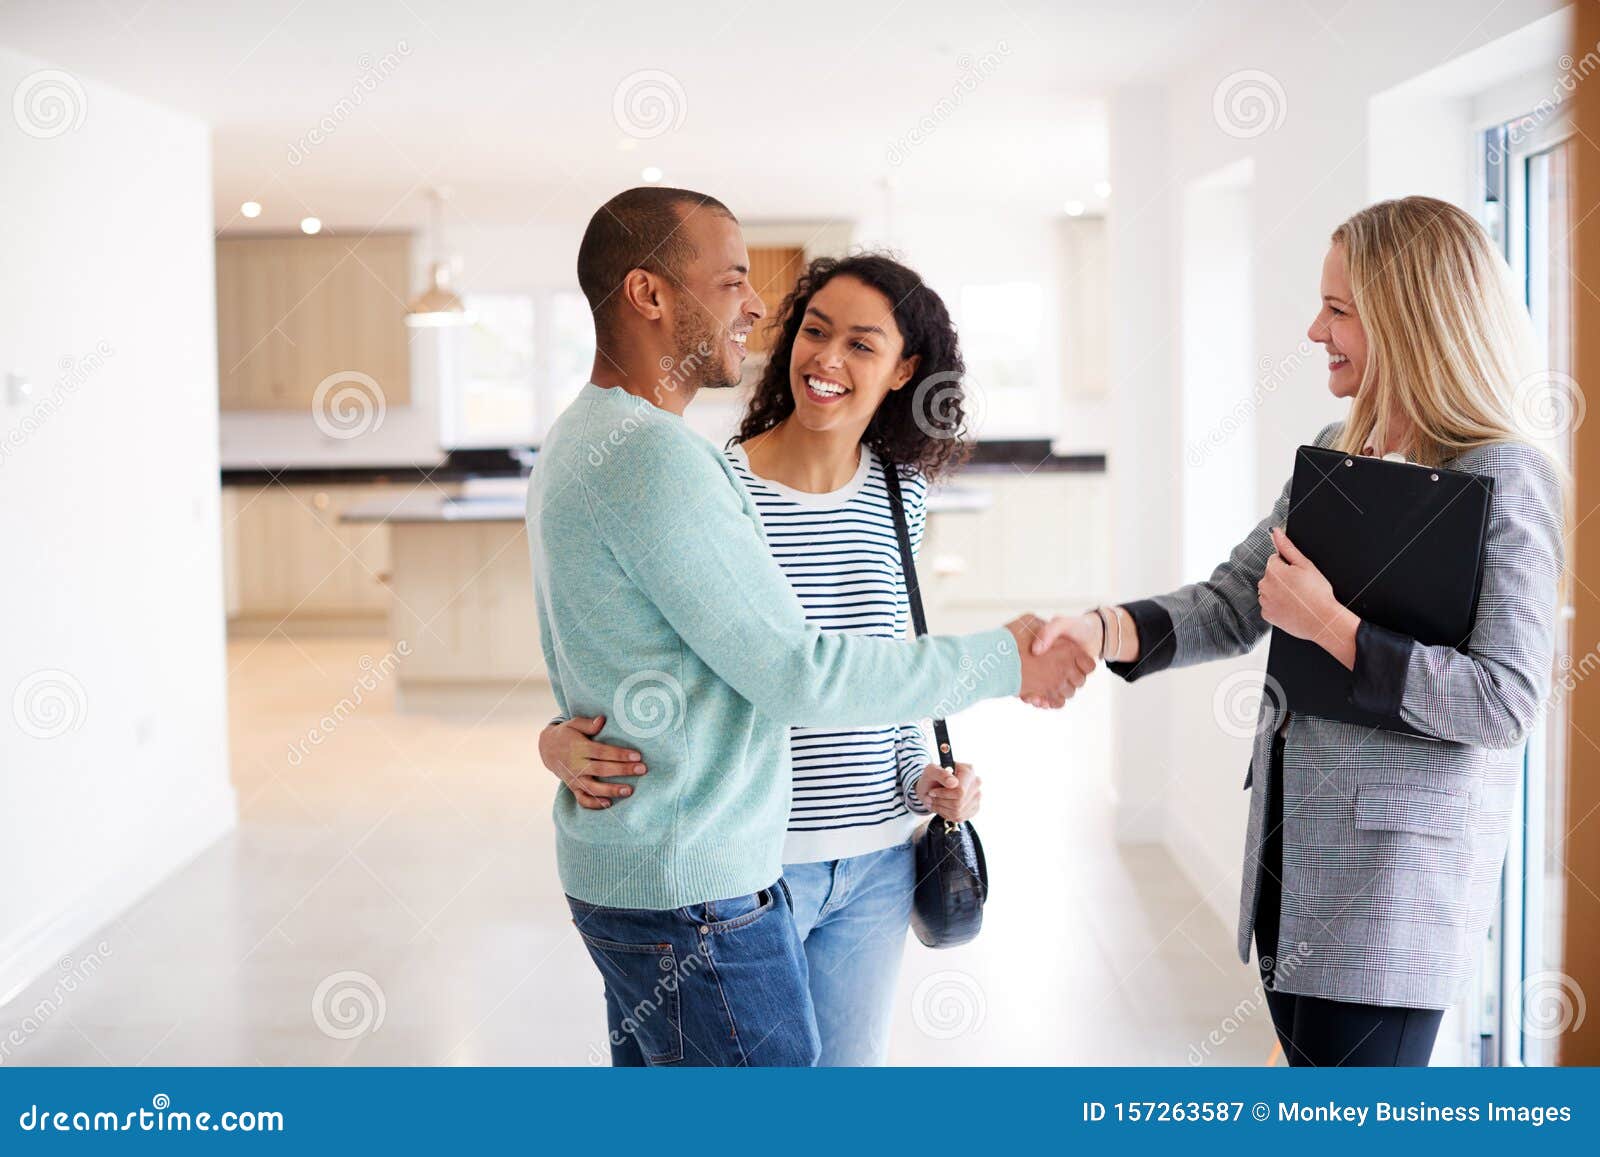 female realtor shaking hands with couple interested in buying house